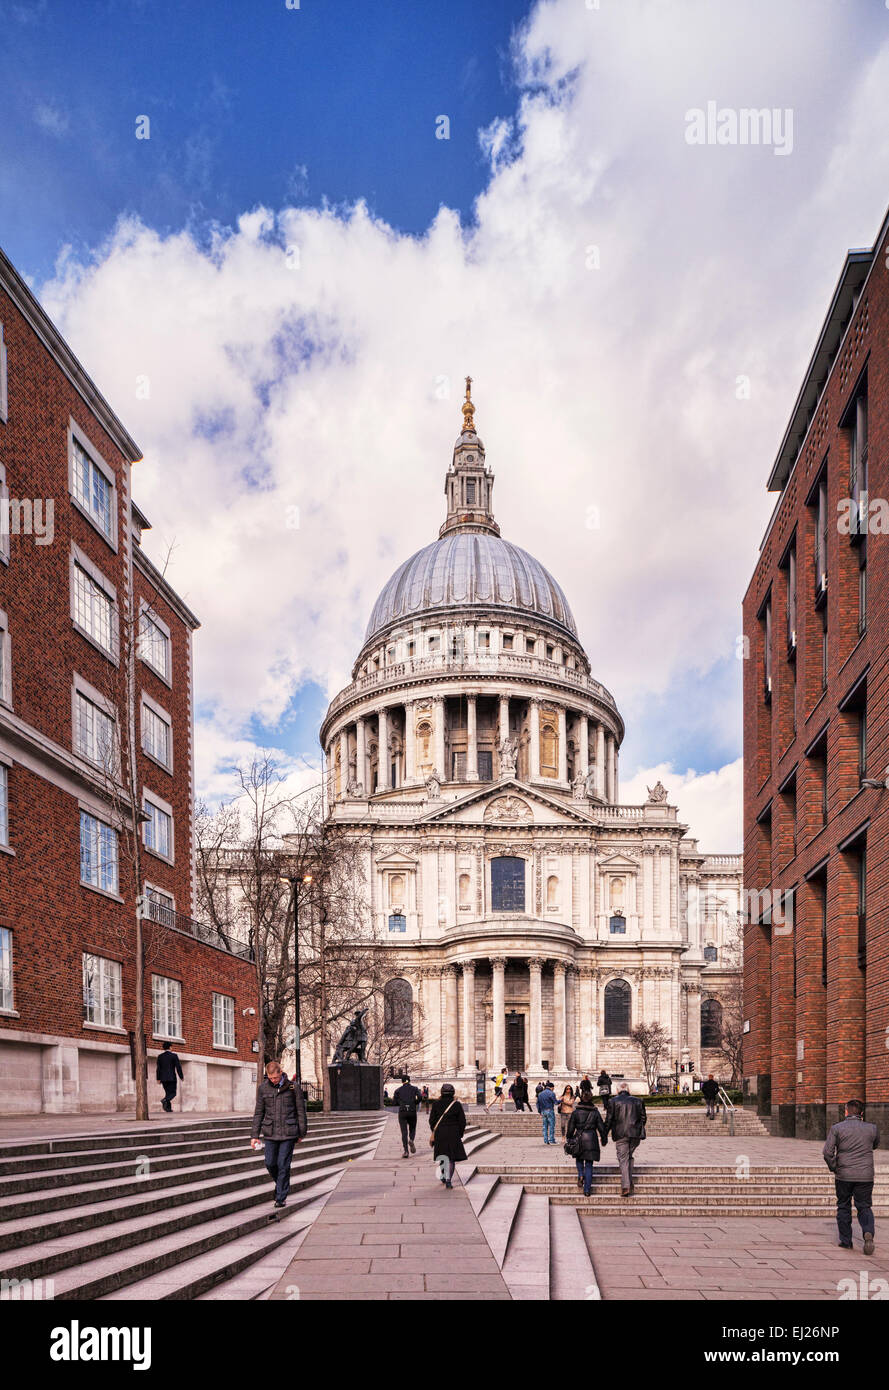 St. Pauls Cathedral, London, England. Stockfoto